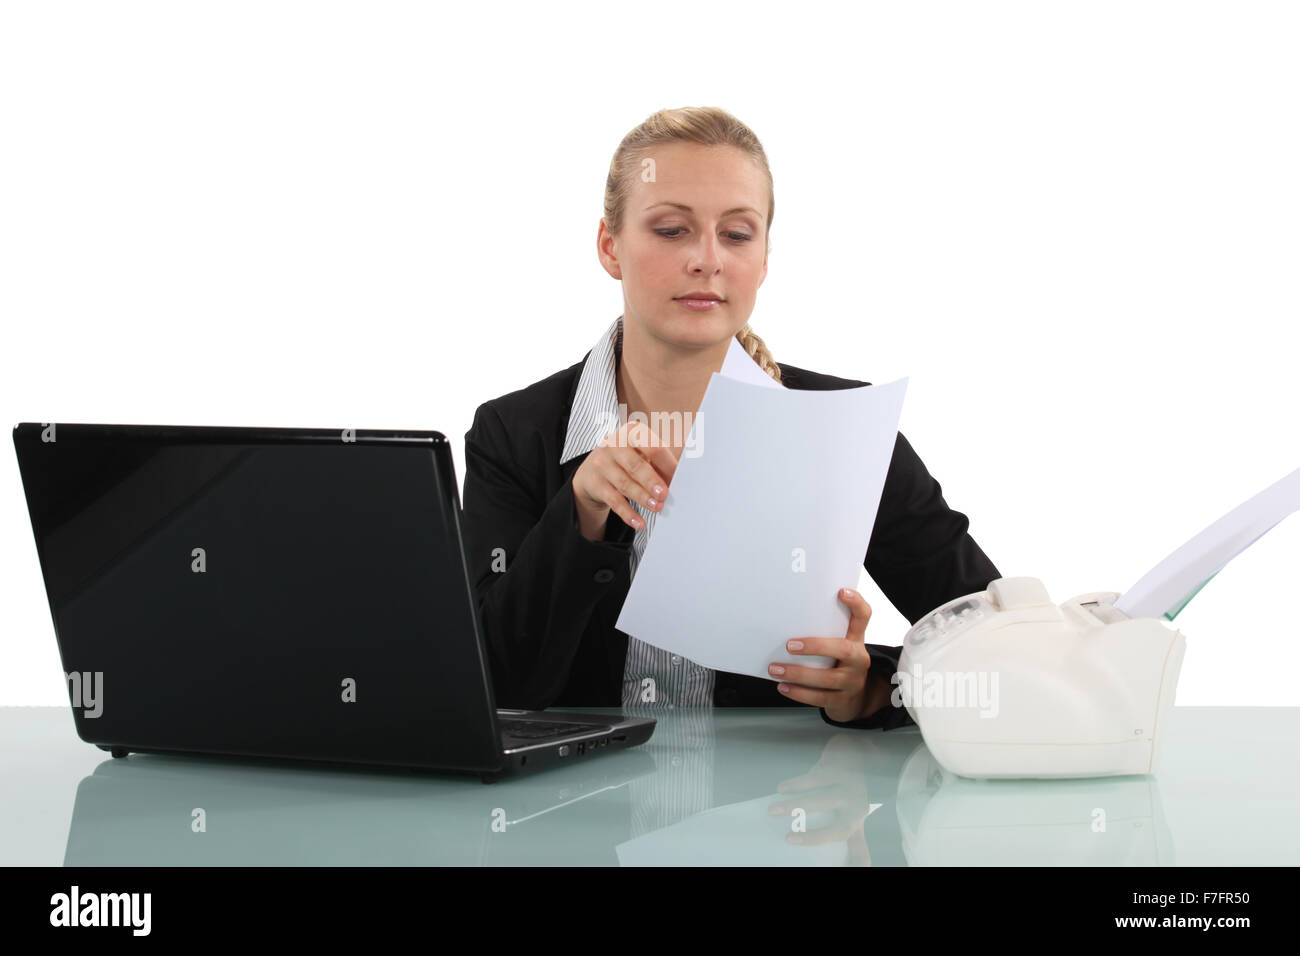 Clerical worker flipping through a document Stock Photo